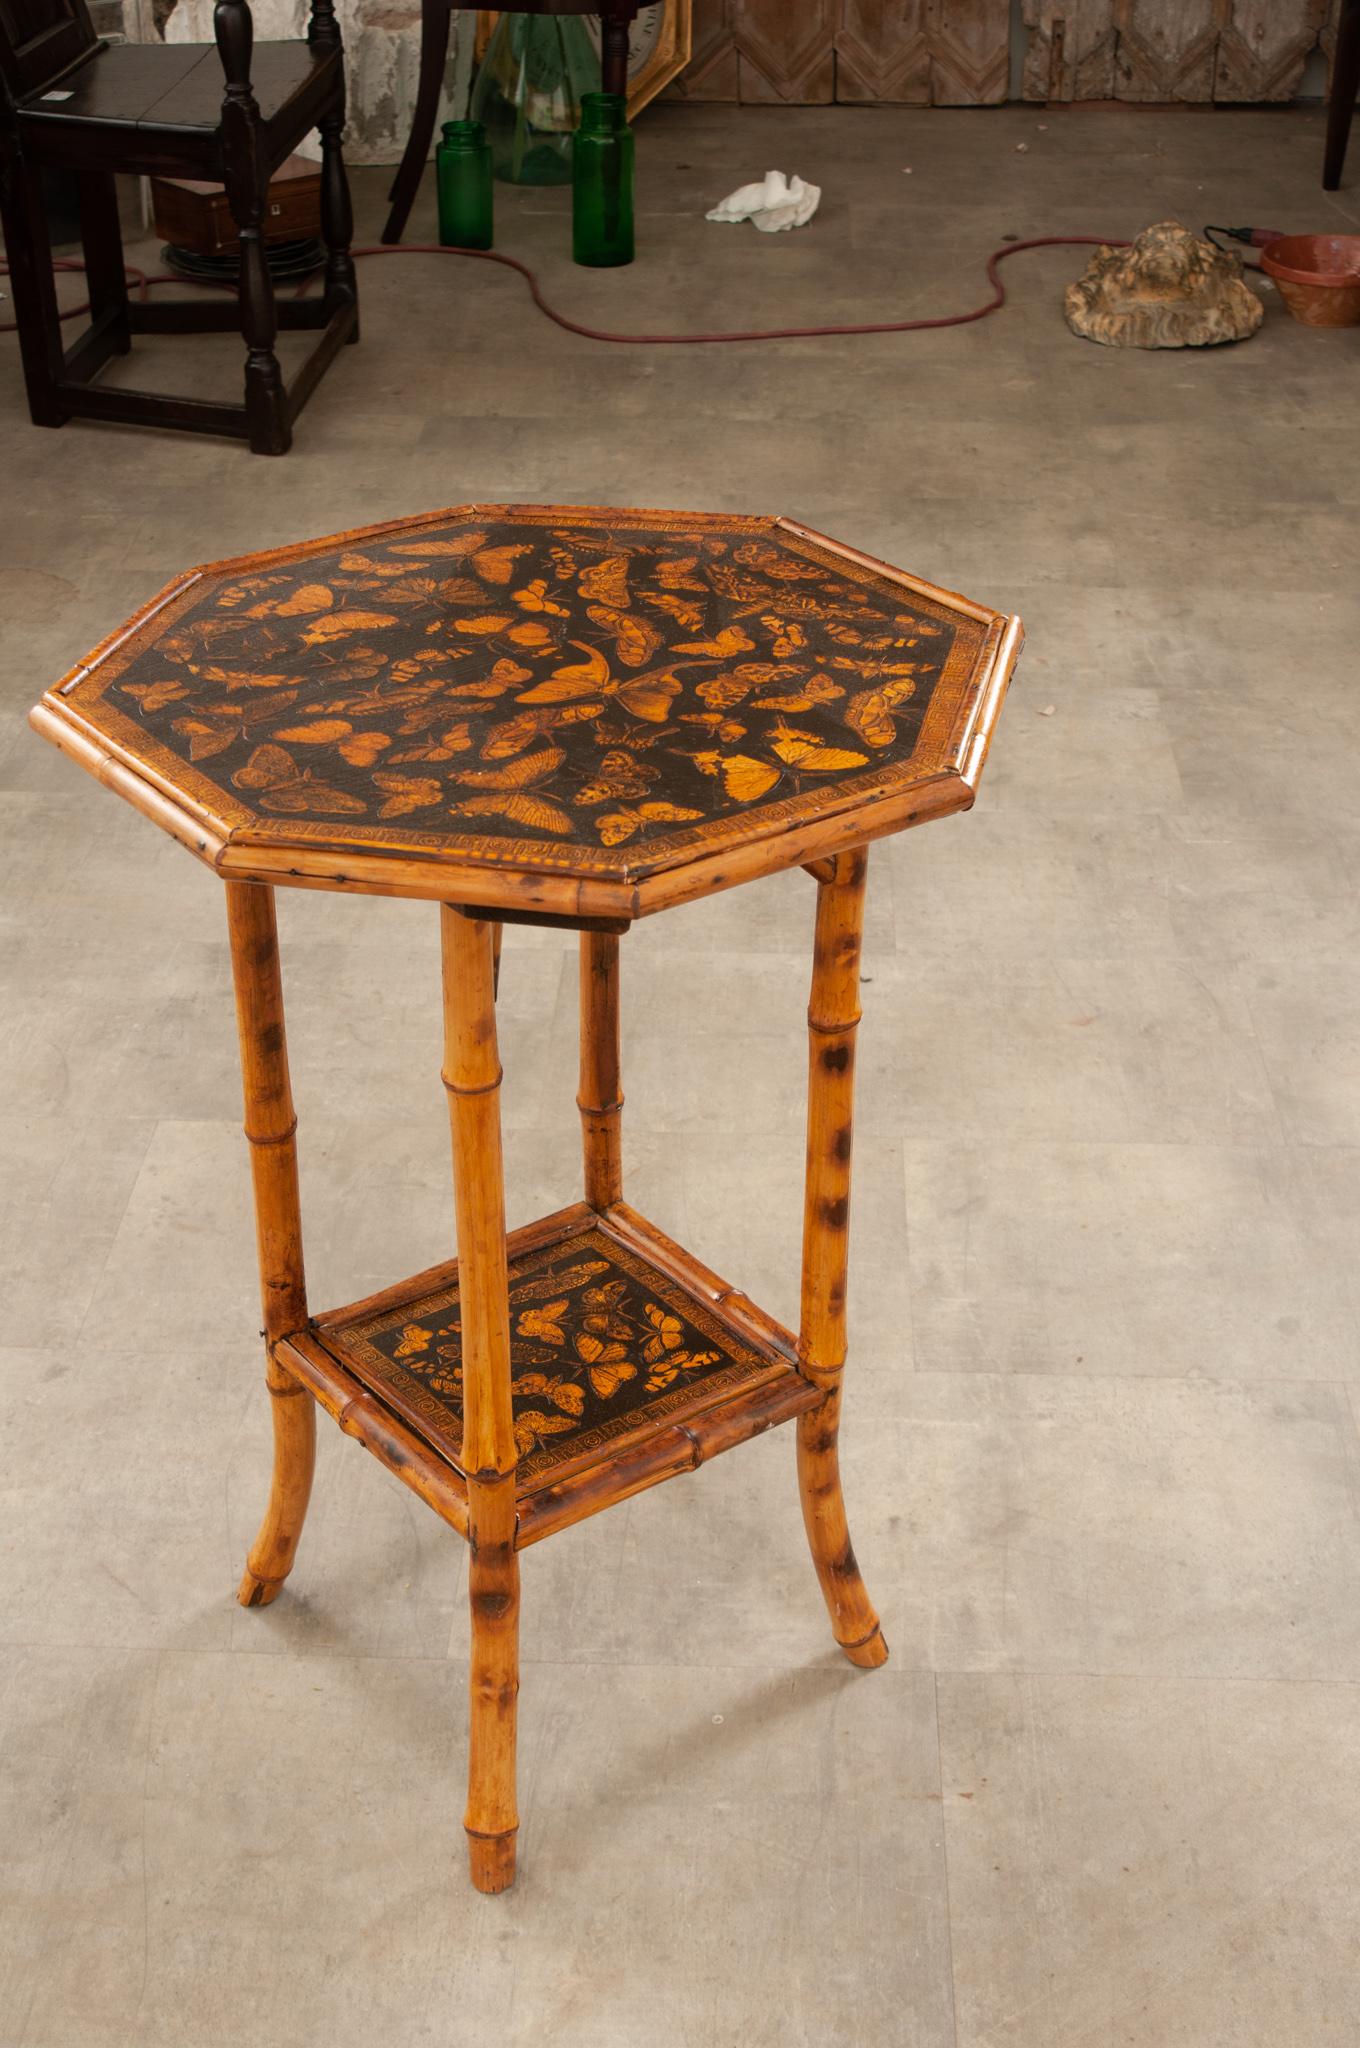 A chic English decoupage bamboo table in the Aesthetic Movement style of the late 19th century. This piece features a speckled bamboo frame supporting two tiers of beautifully decoupaged shelves showcasing gilded butterflies and moths surrounded by